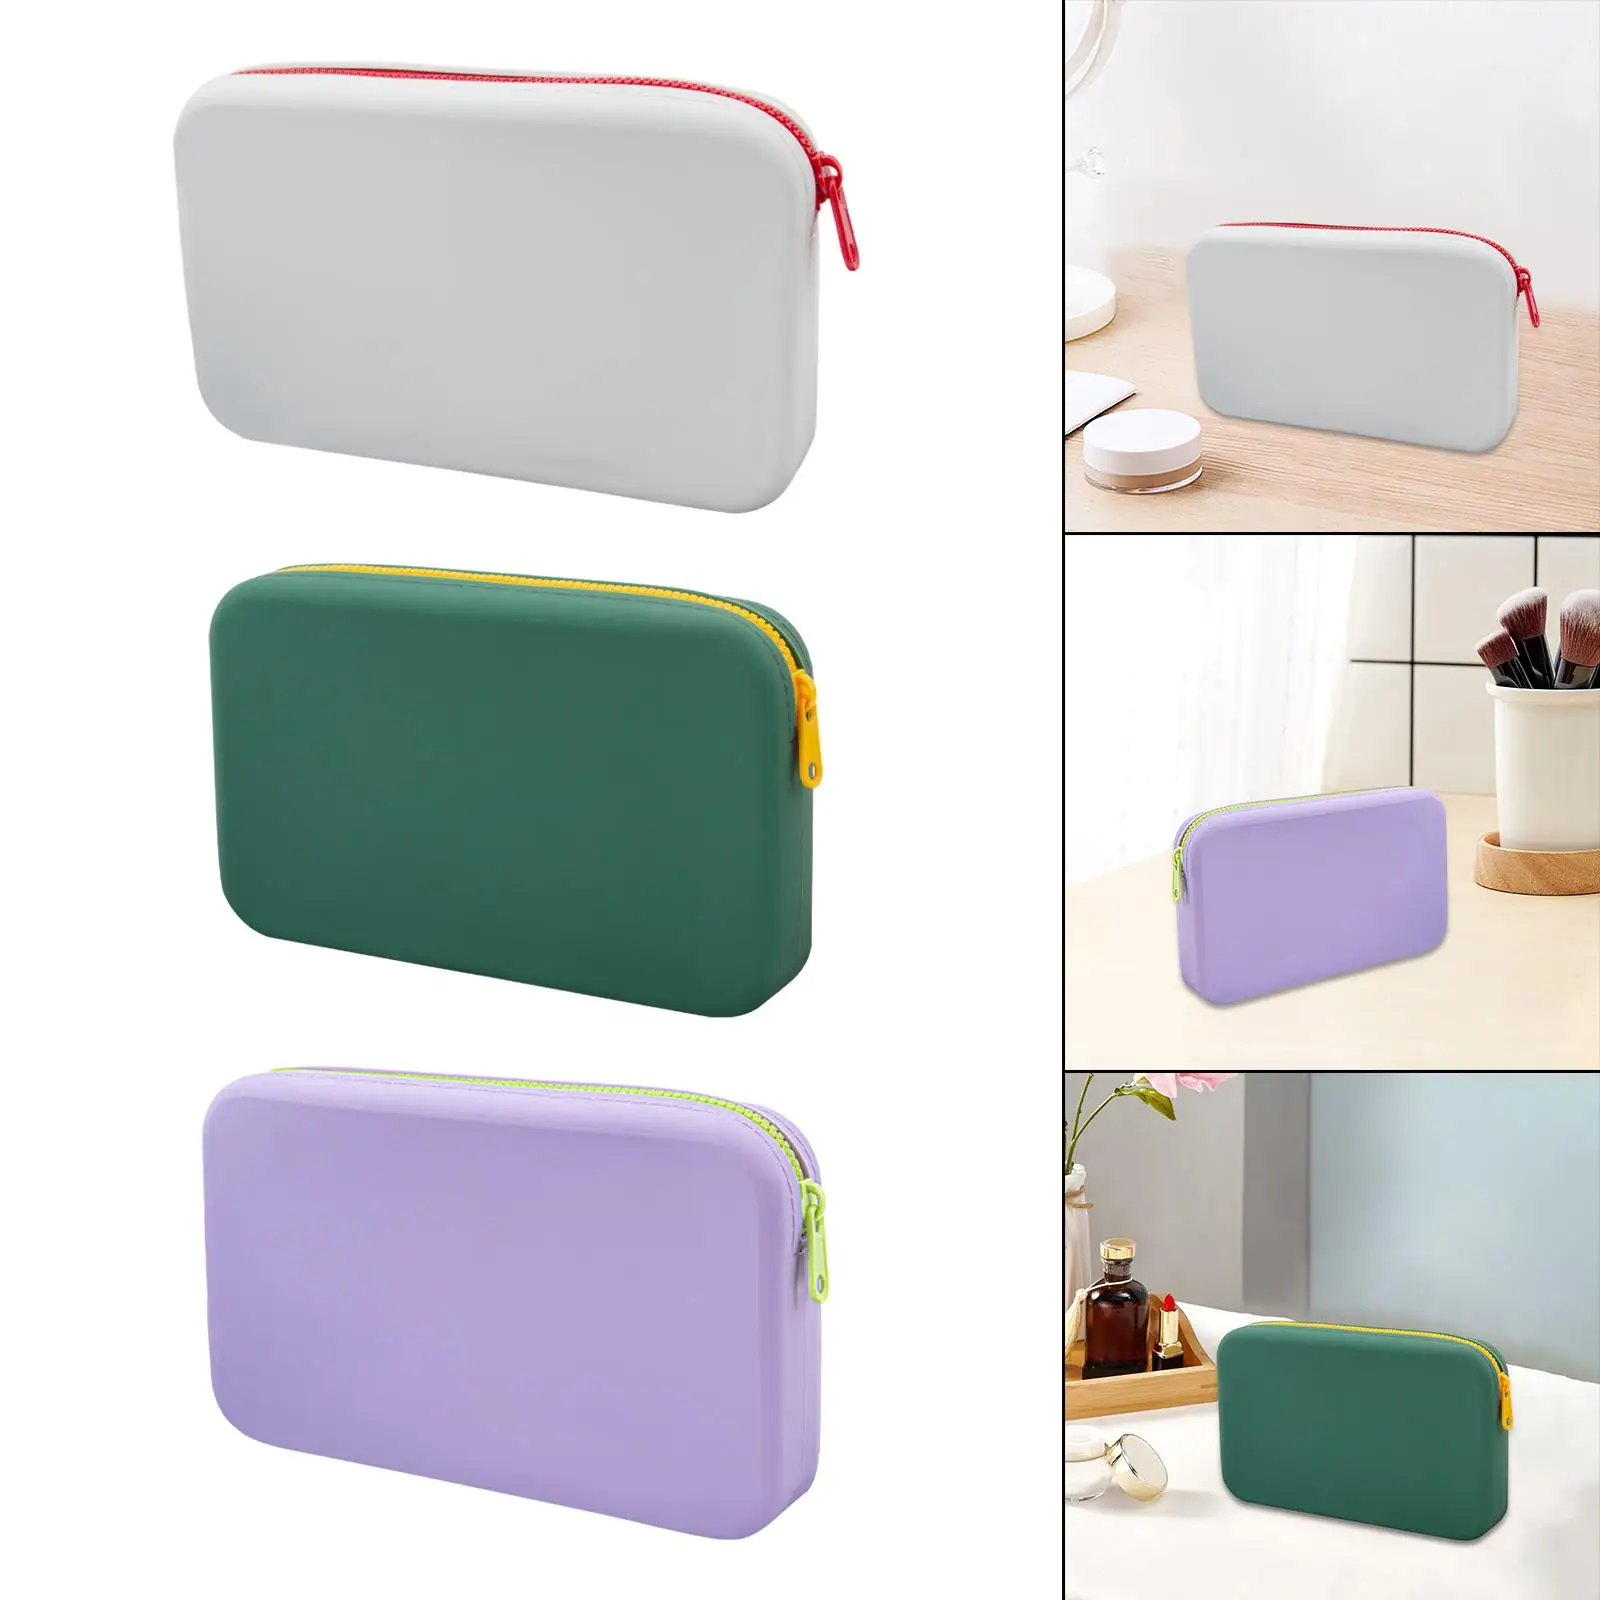 Makeup Bag Cosmetic Storage Bag Toiletry Bags Makeup Brush Holder Cosmetic Organizer for Toiletries Traveling Beach Home Gym